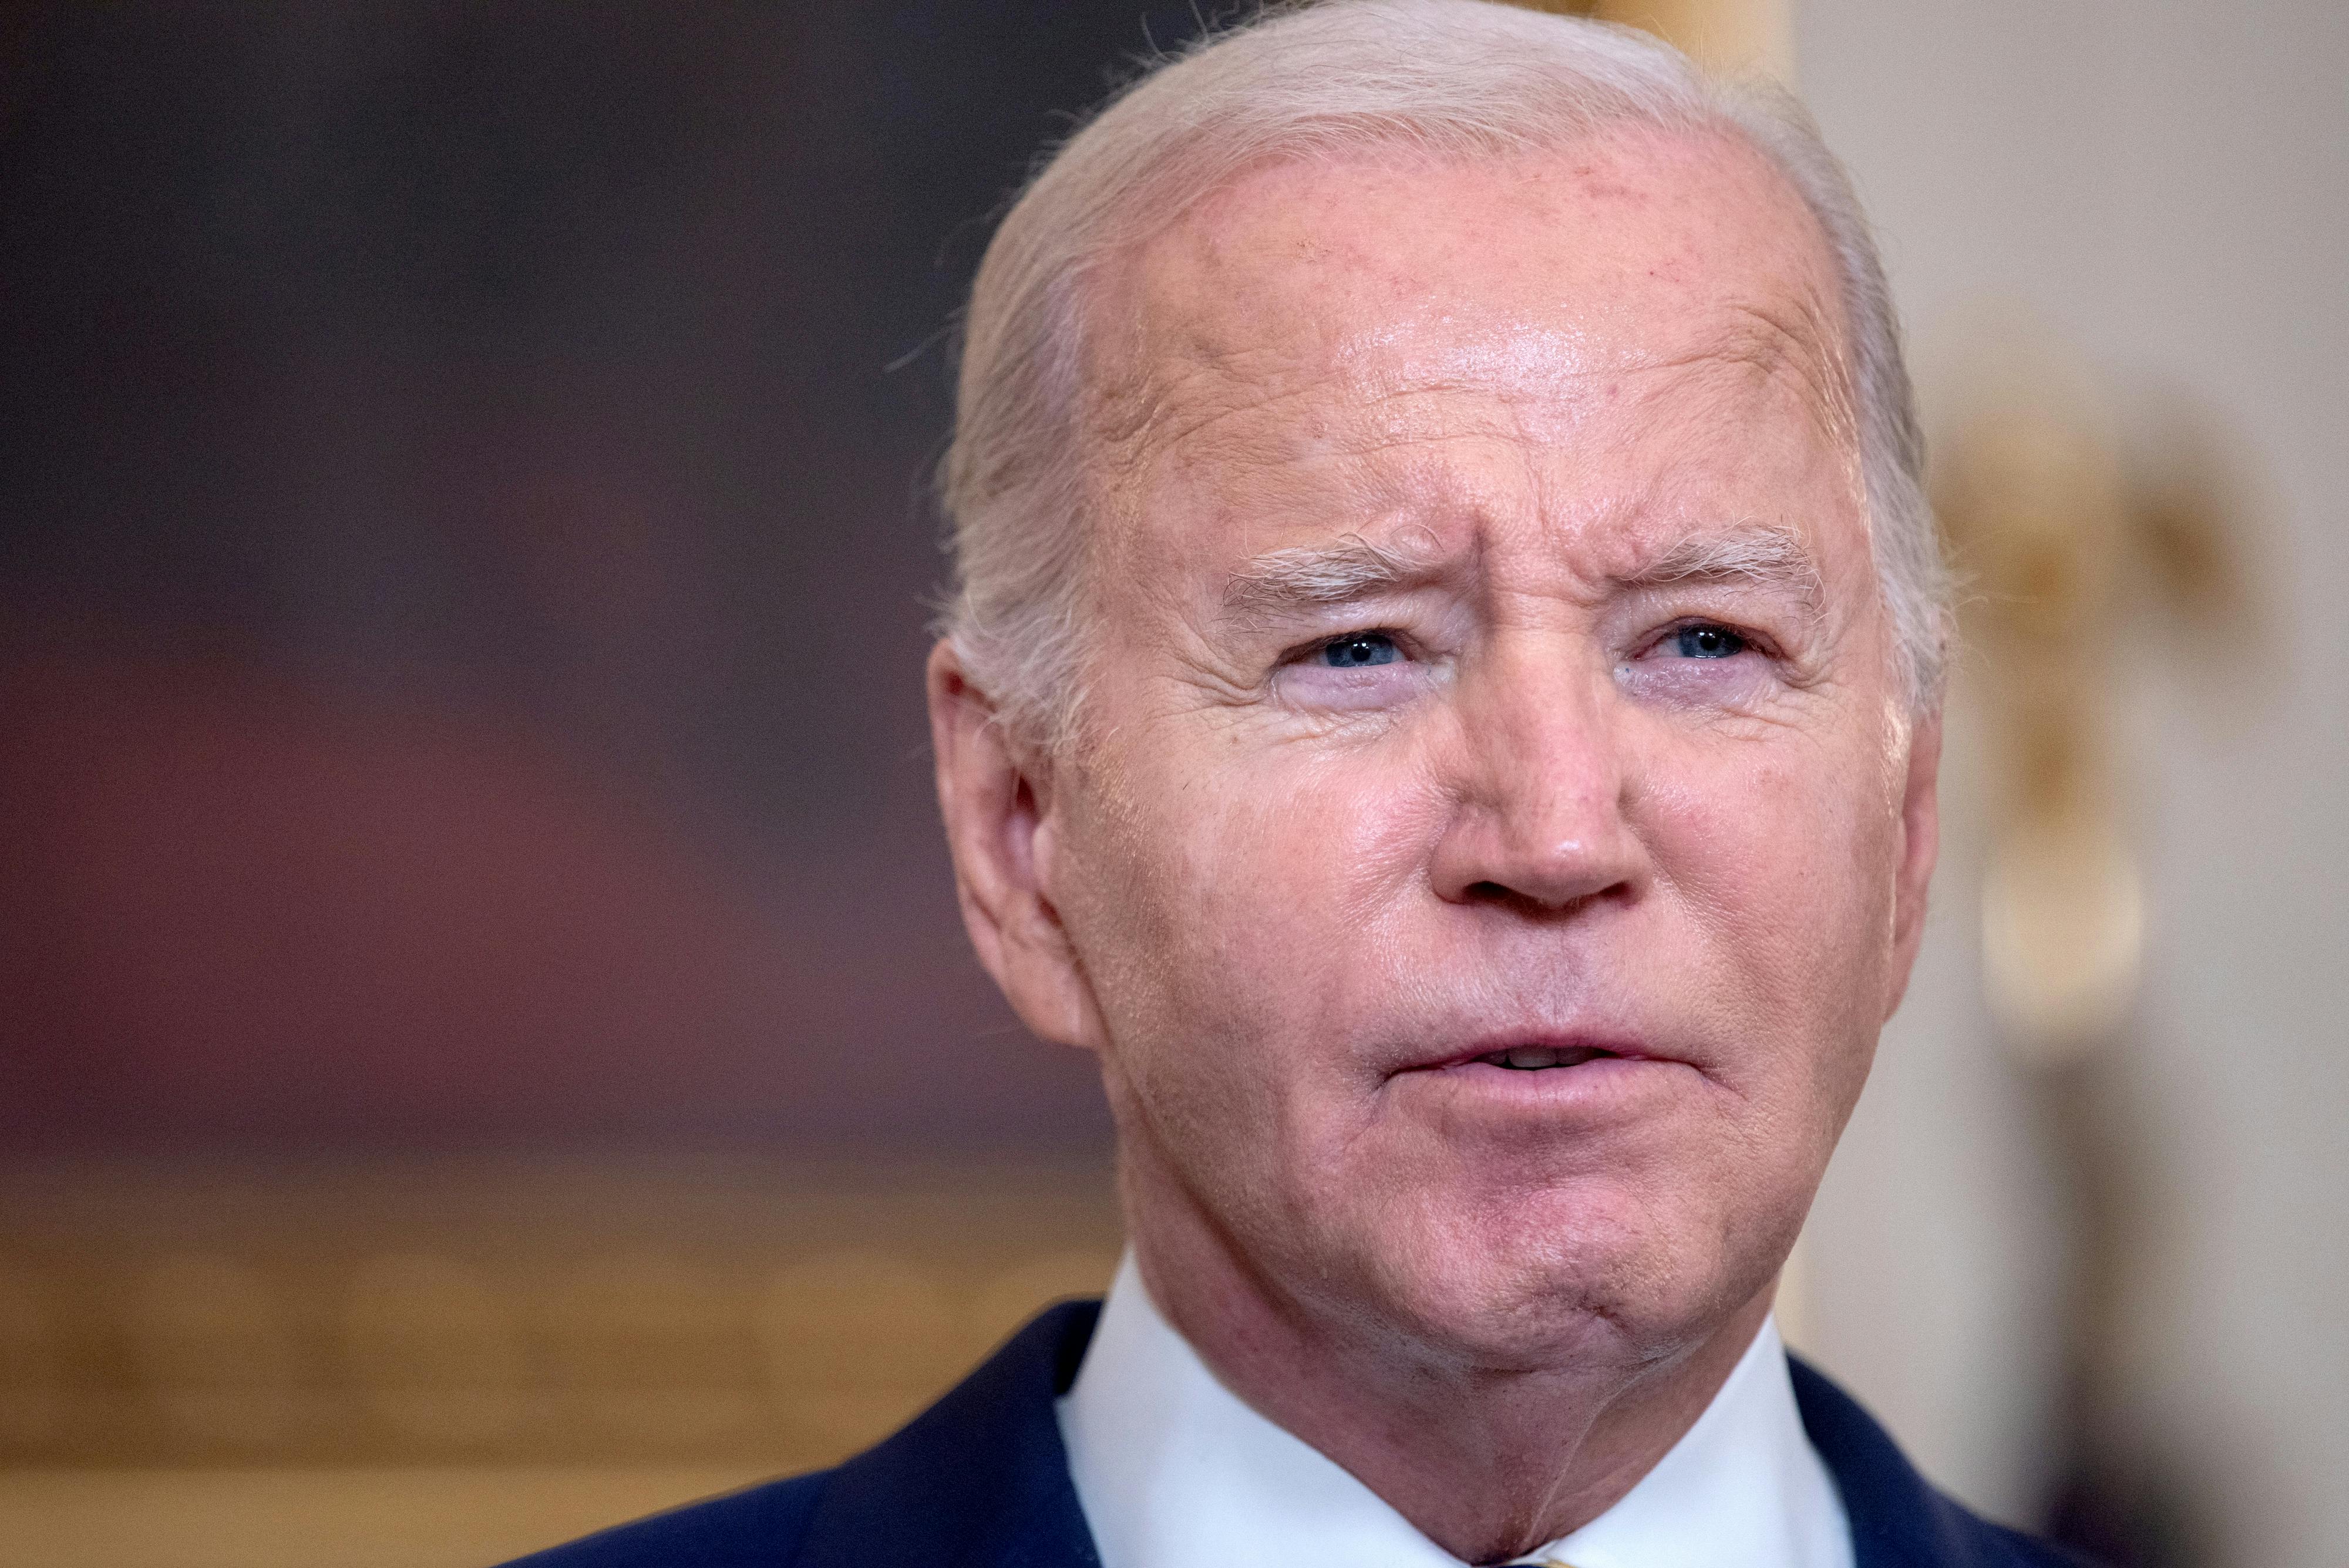 Signs with coded anti-Biden message removed from Dome during